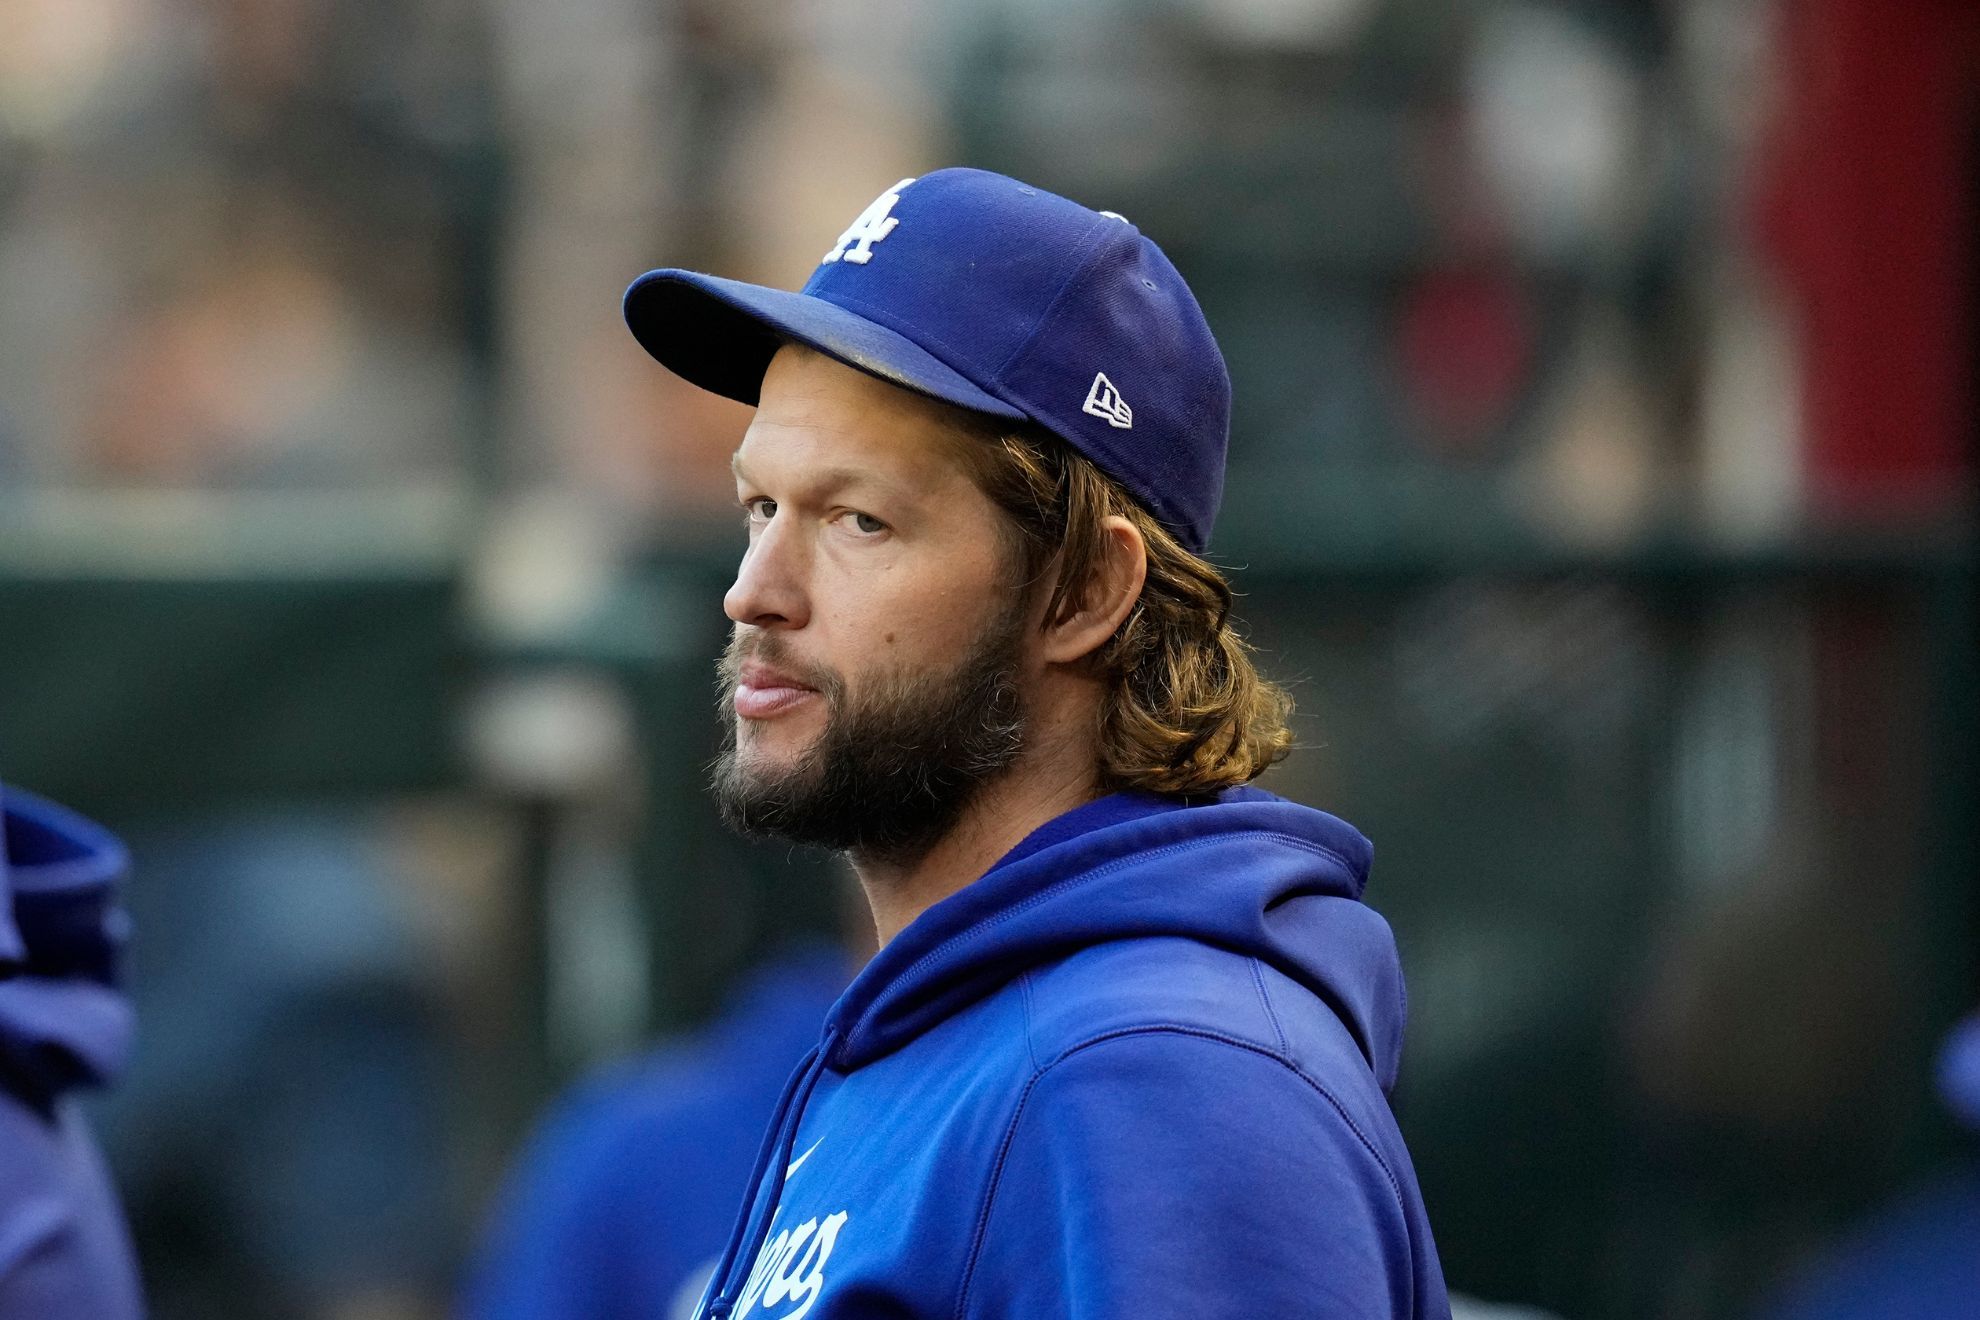 Clayton Kershaws new contract with the LA Dodgers can make him a lot of money